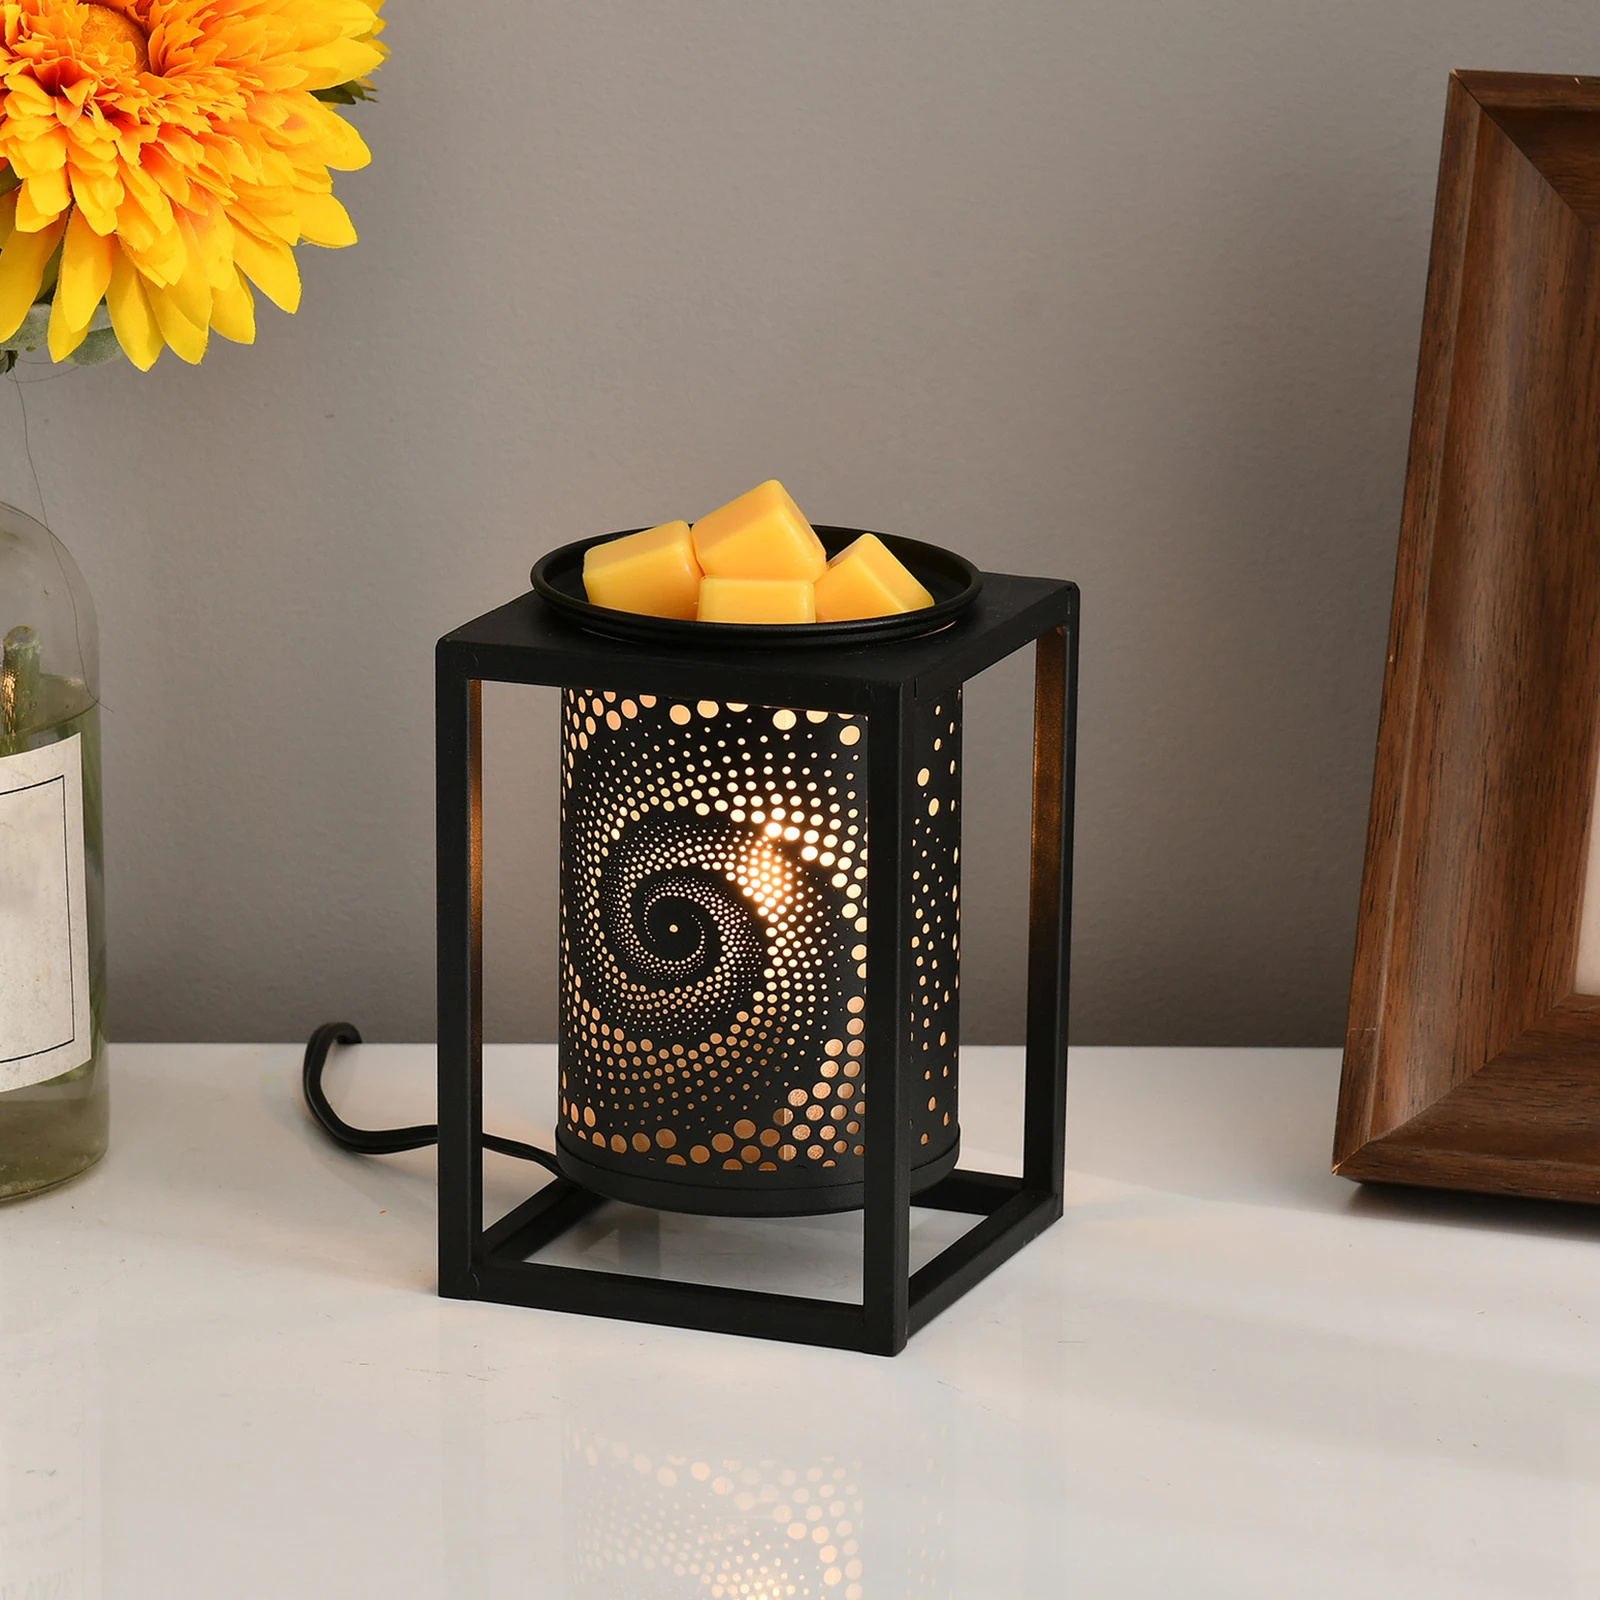 Candle Warmer Lamp Hollow Decorative Diffuser Wax Melter Mood Light Aroma Oil Burner No Flame for Melting Candles Room Spa Home